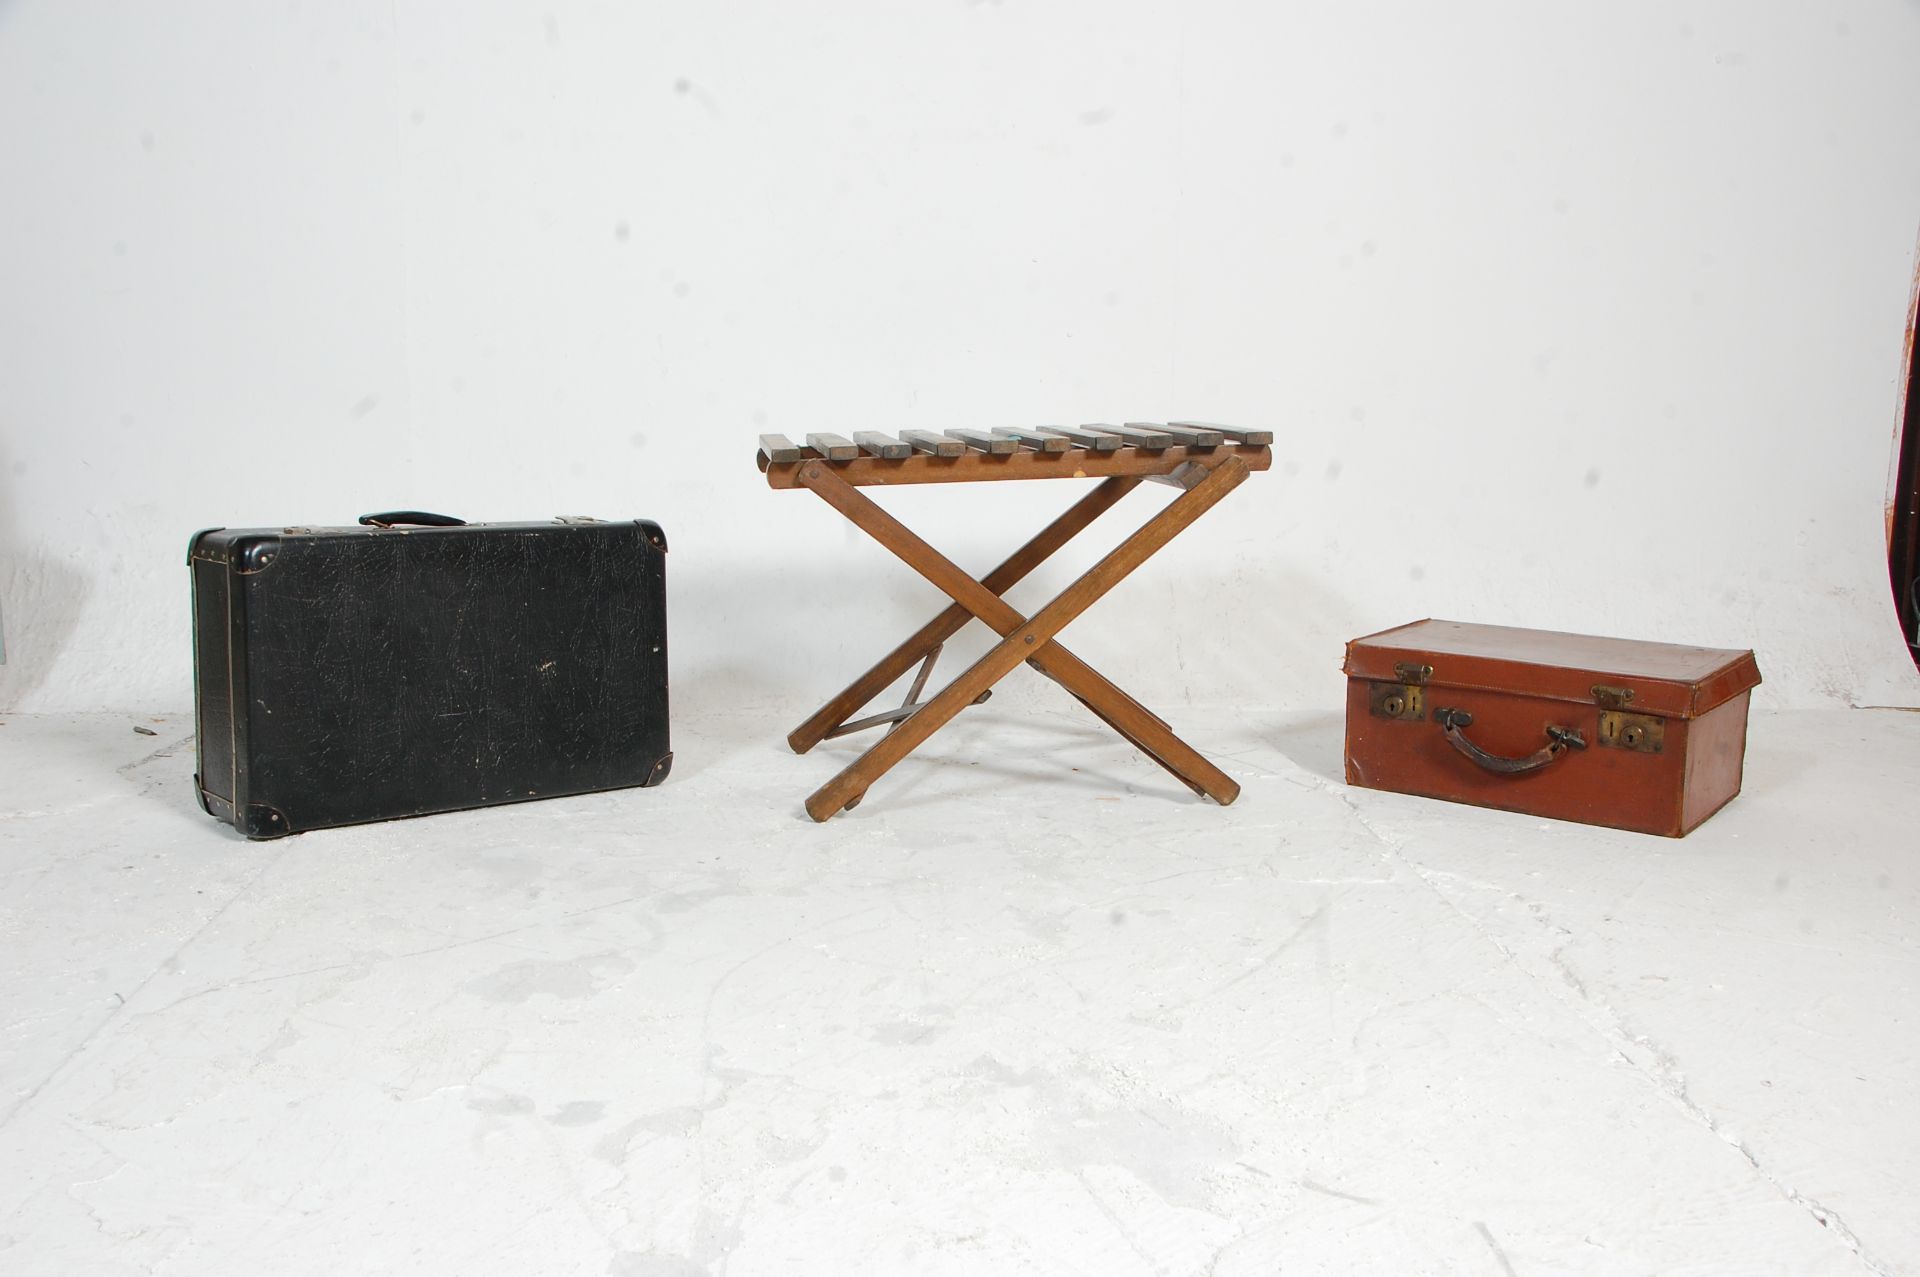 Two vintage leather suitcases mounted on a vintage metamorphic folding wooden slatted suitcase